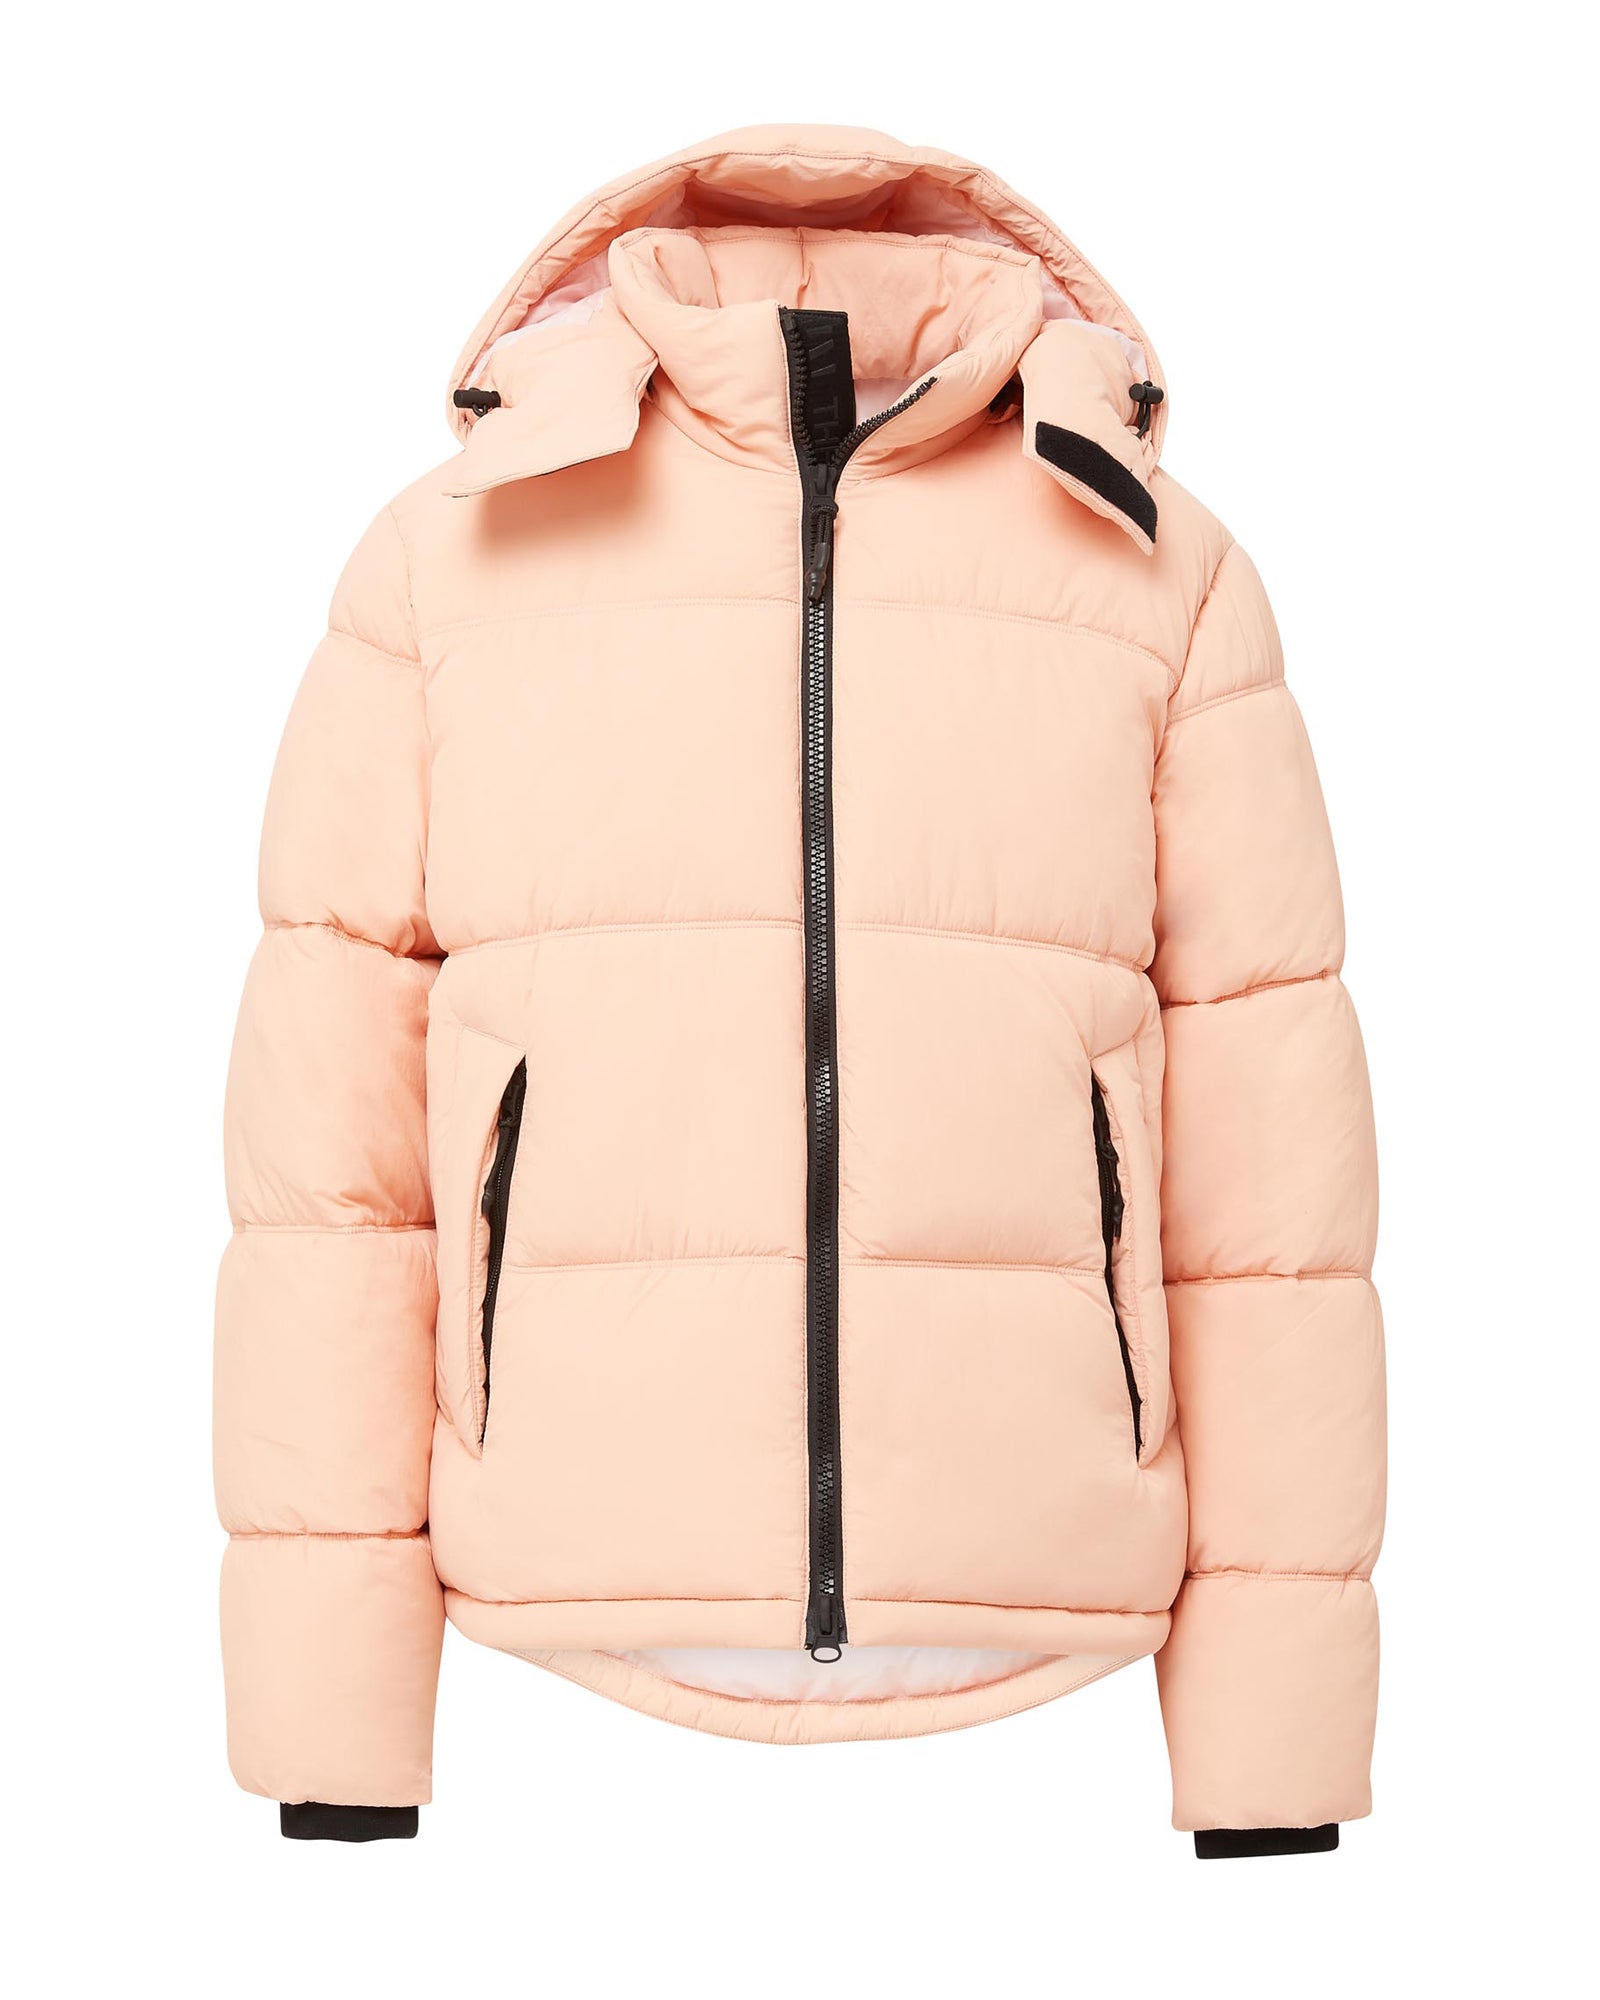 Hooded Puffer - Coral Pink